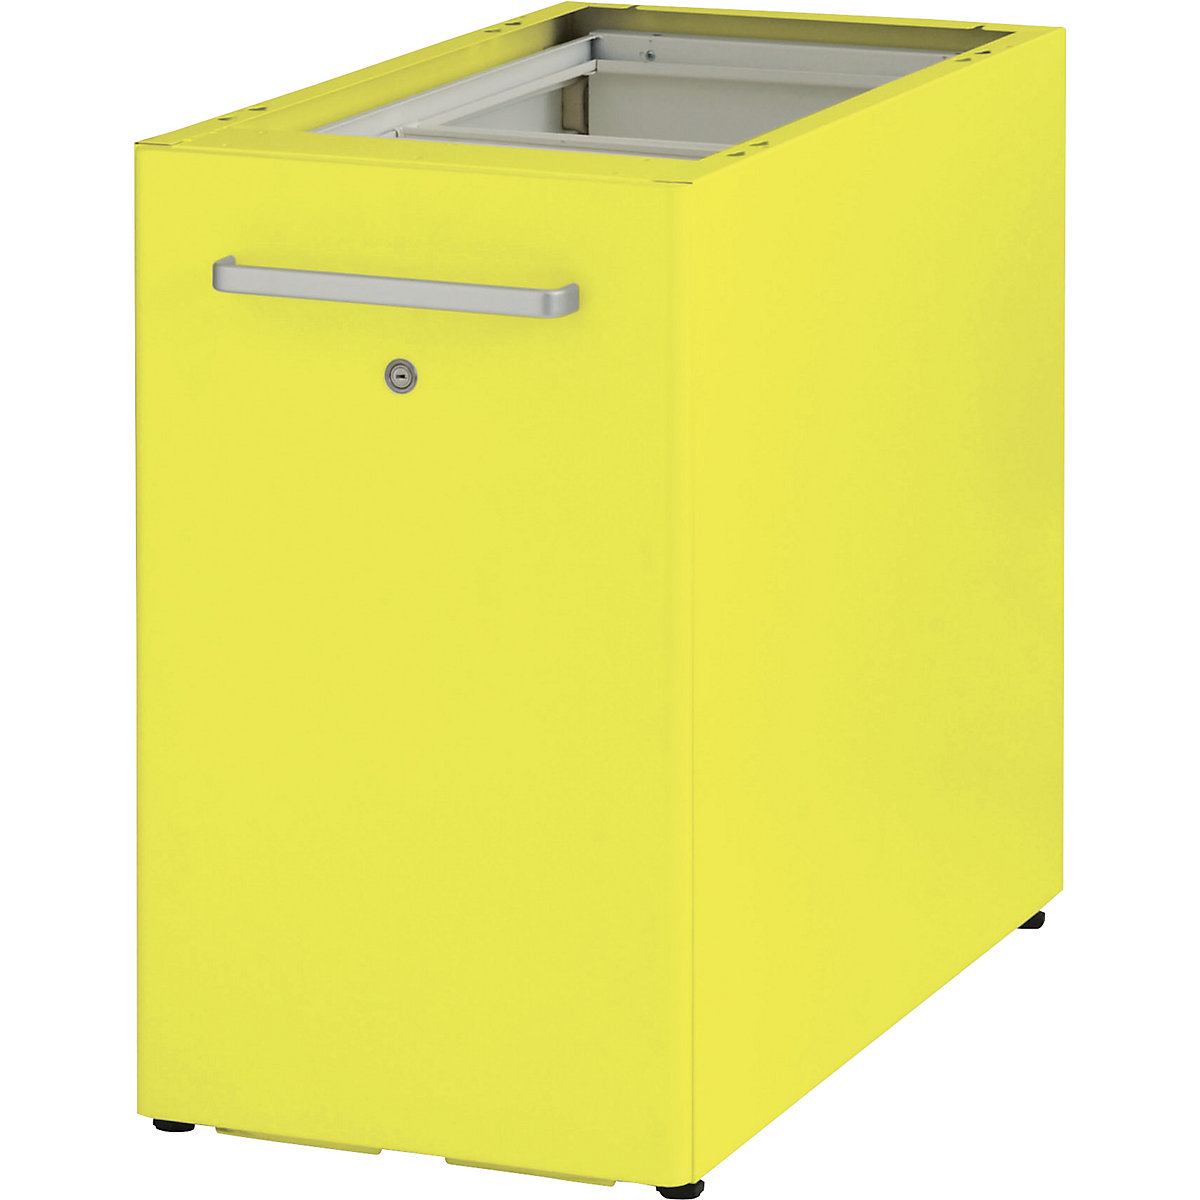 Tower™ 2 add-on furniture, without worktop, with pin board – BISLEY, for the right side, with 1 shelf, zinc yellow-20